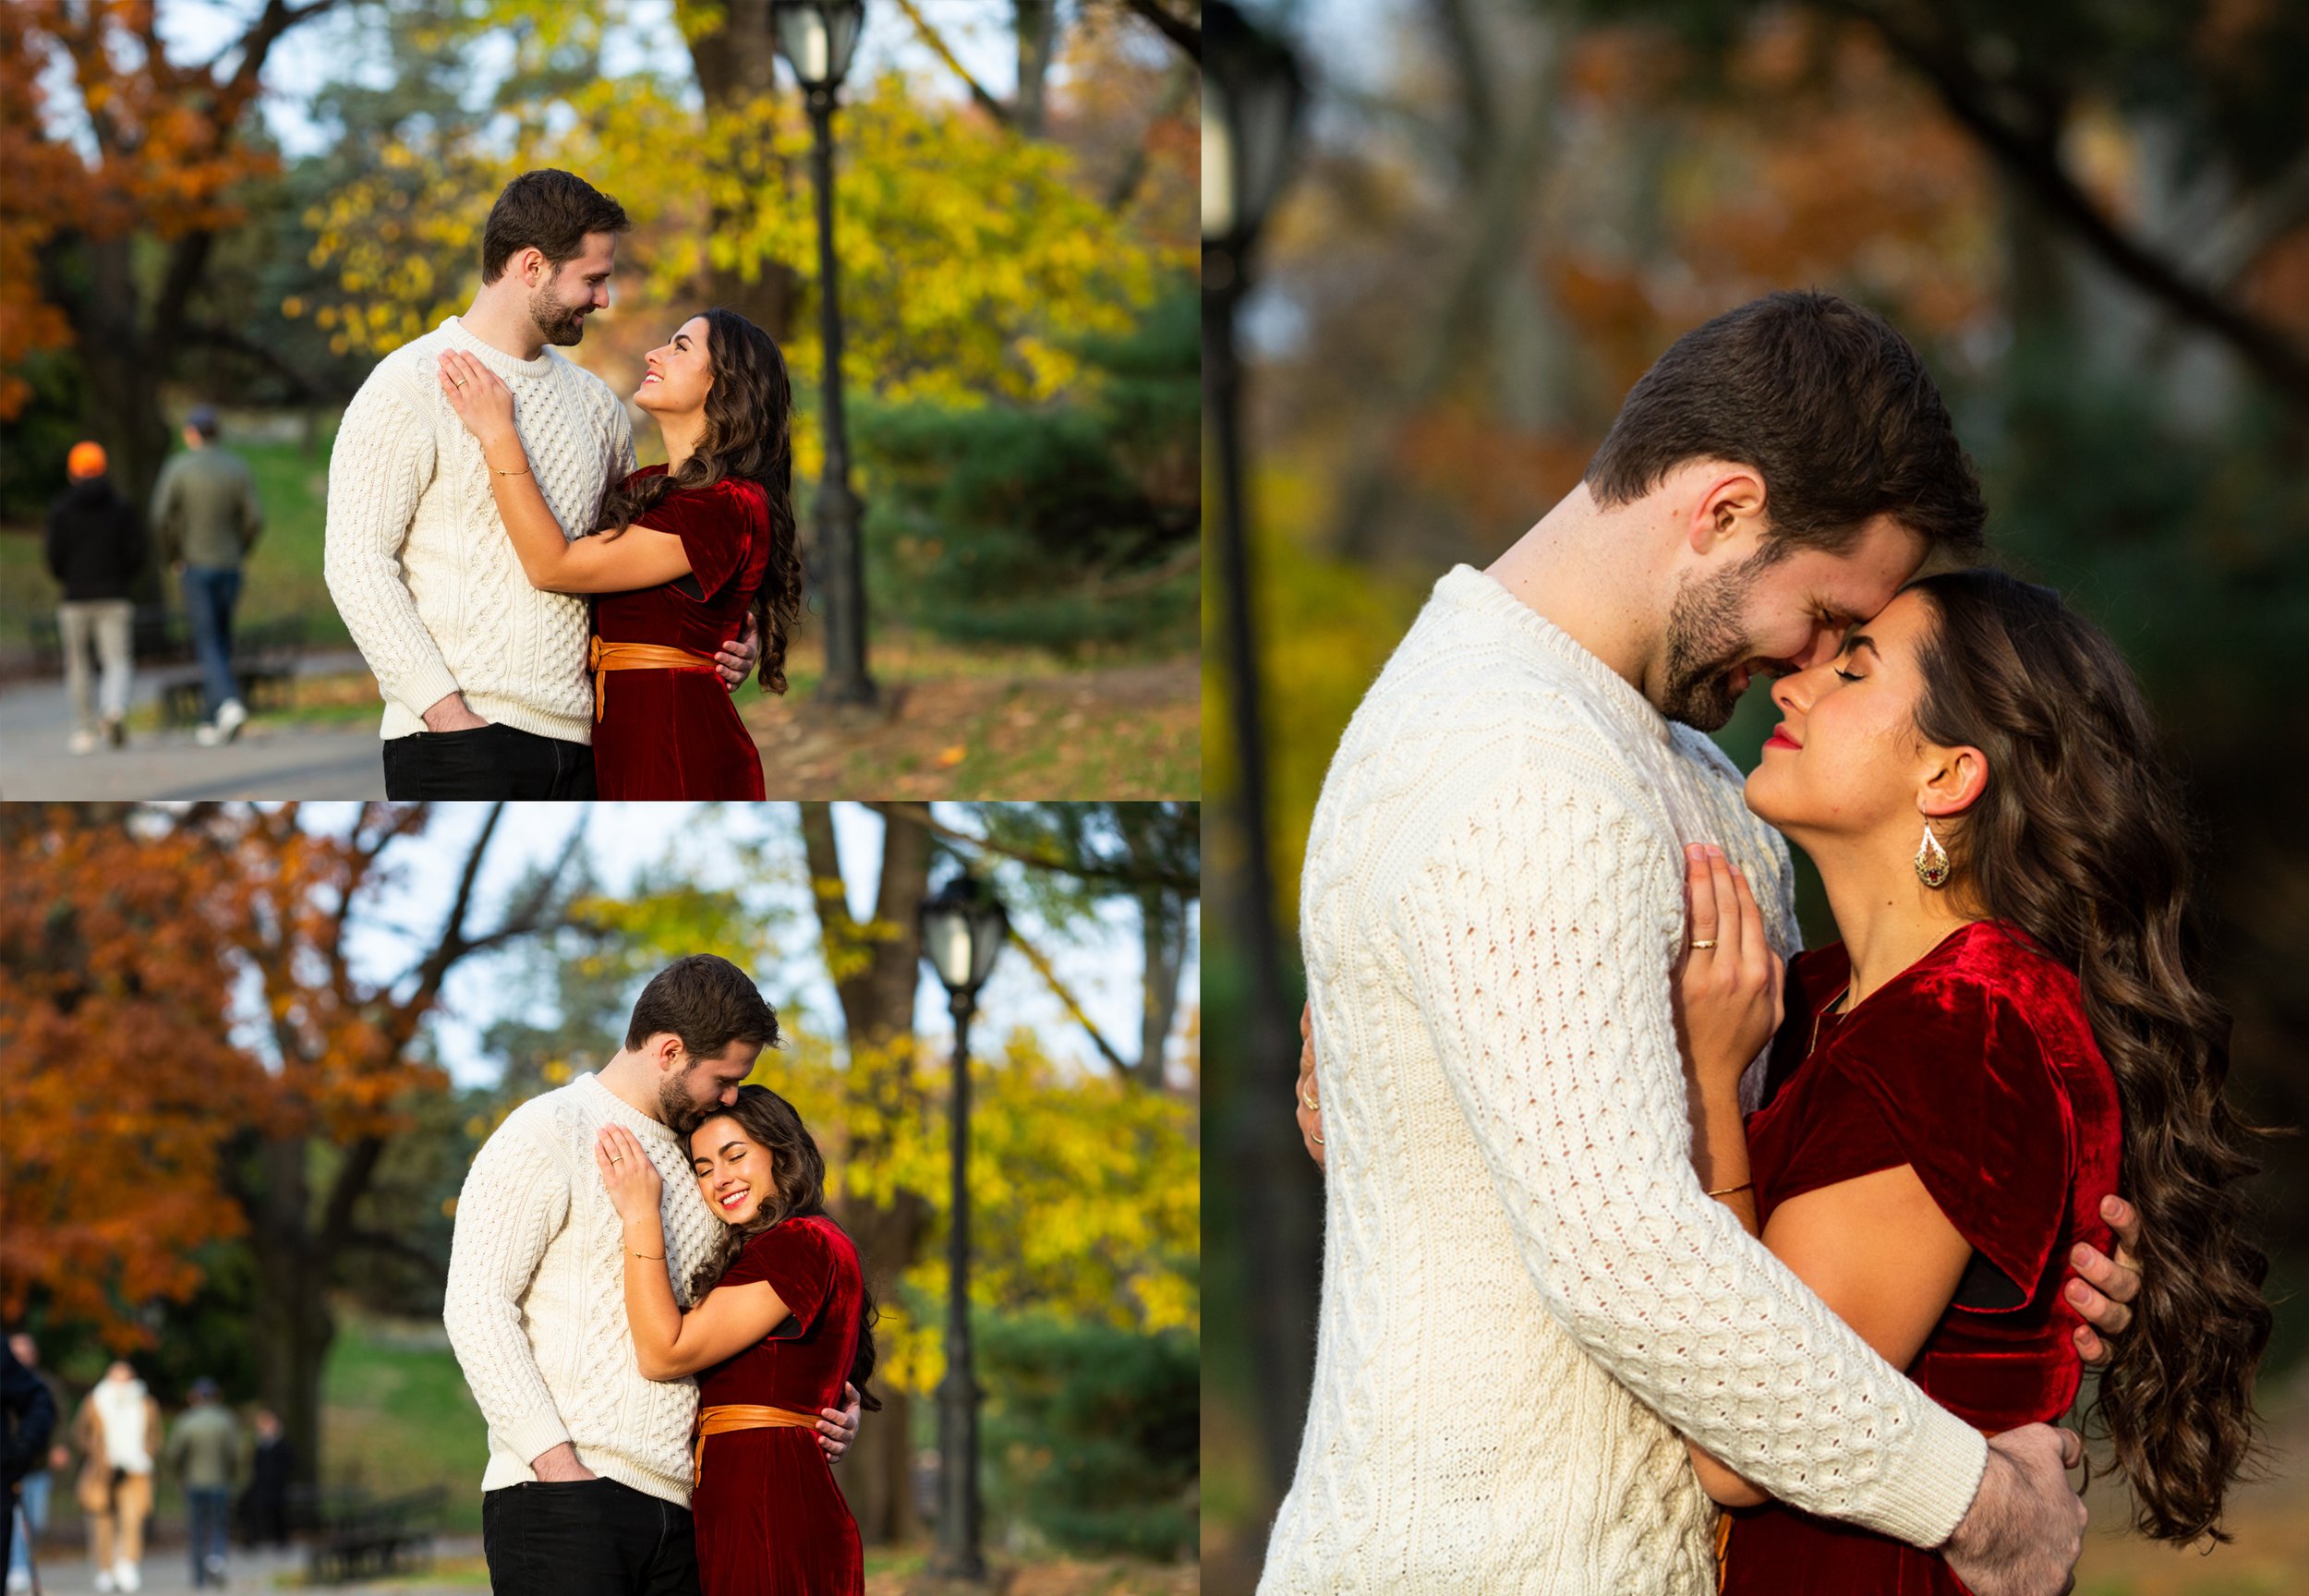 Central Park Fall Foliage Engagement Session NYC Photographer_0002.jpg